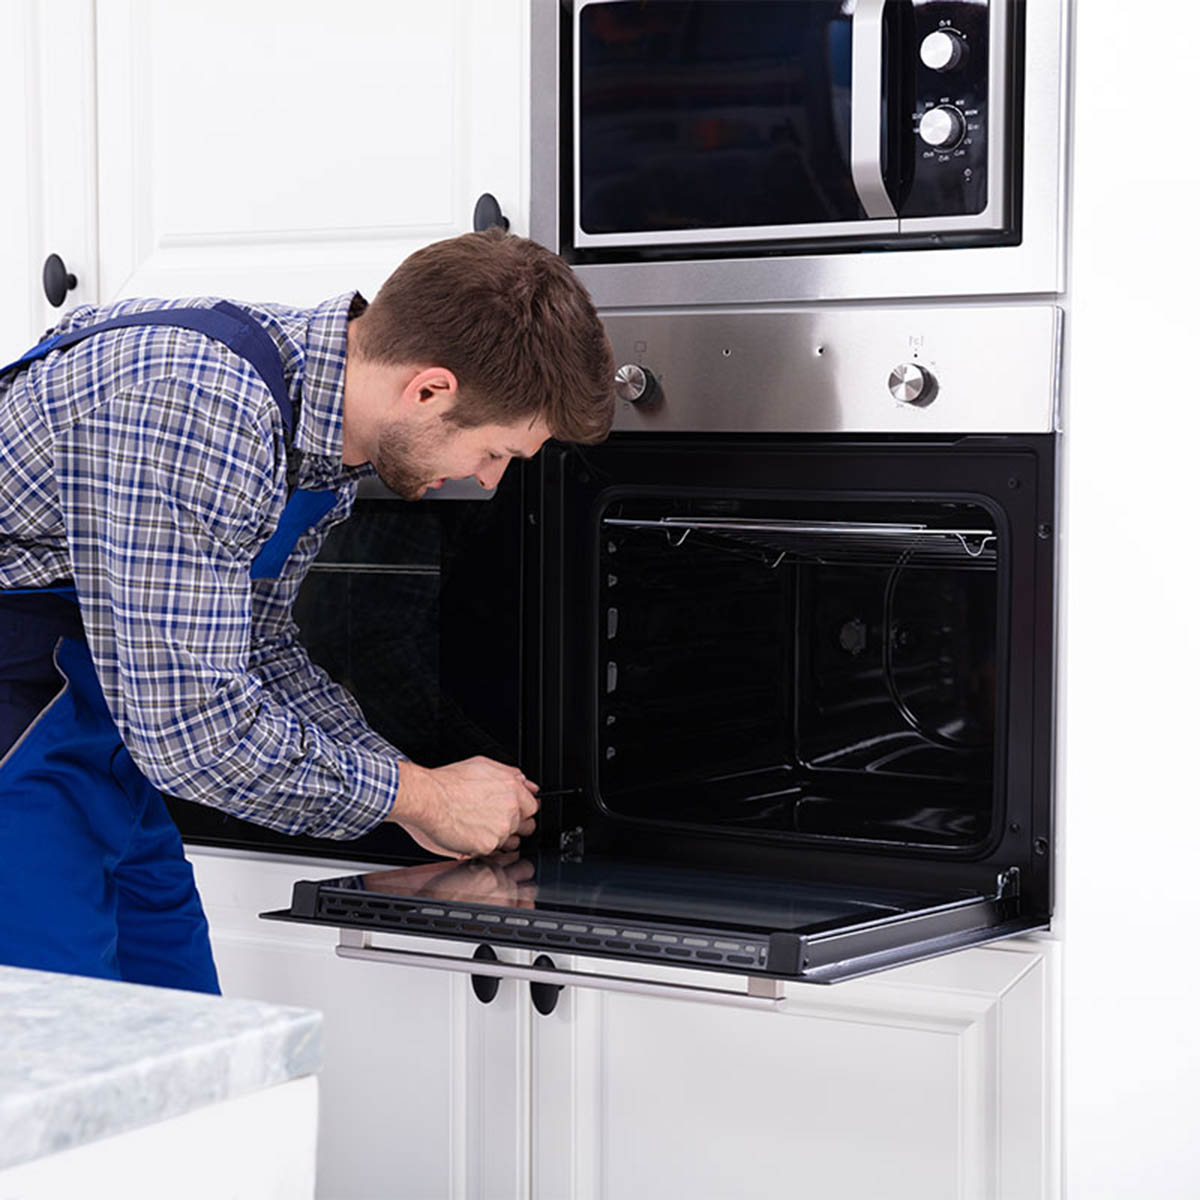 How To Fix The Error Code F5-E7 For Maytag Oven